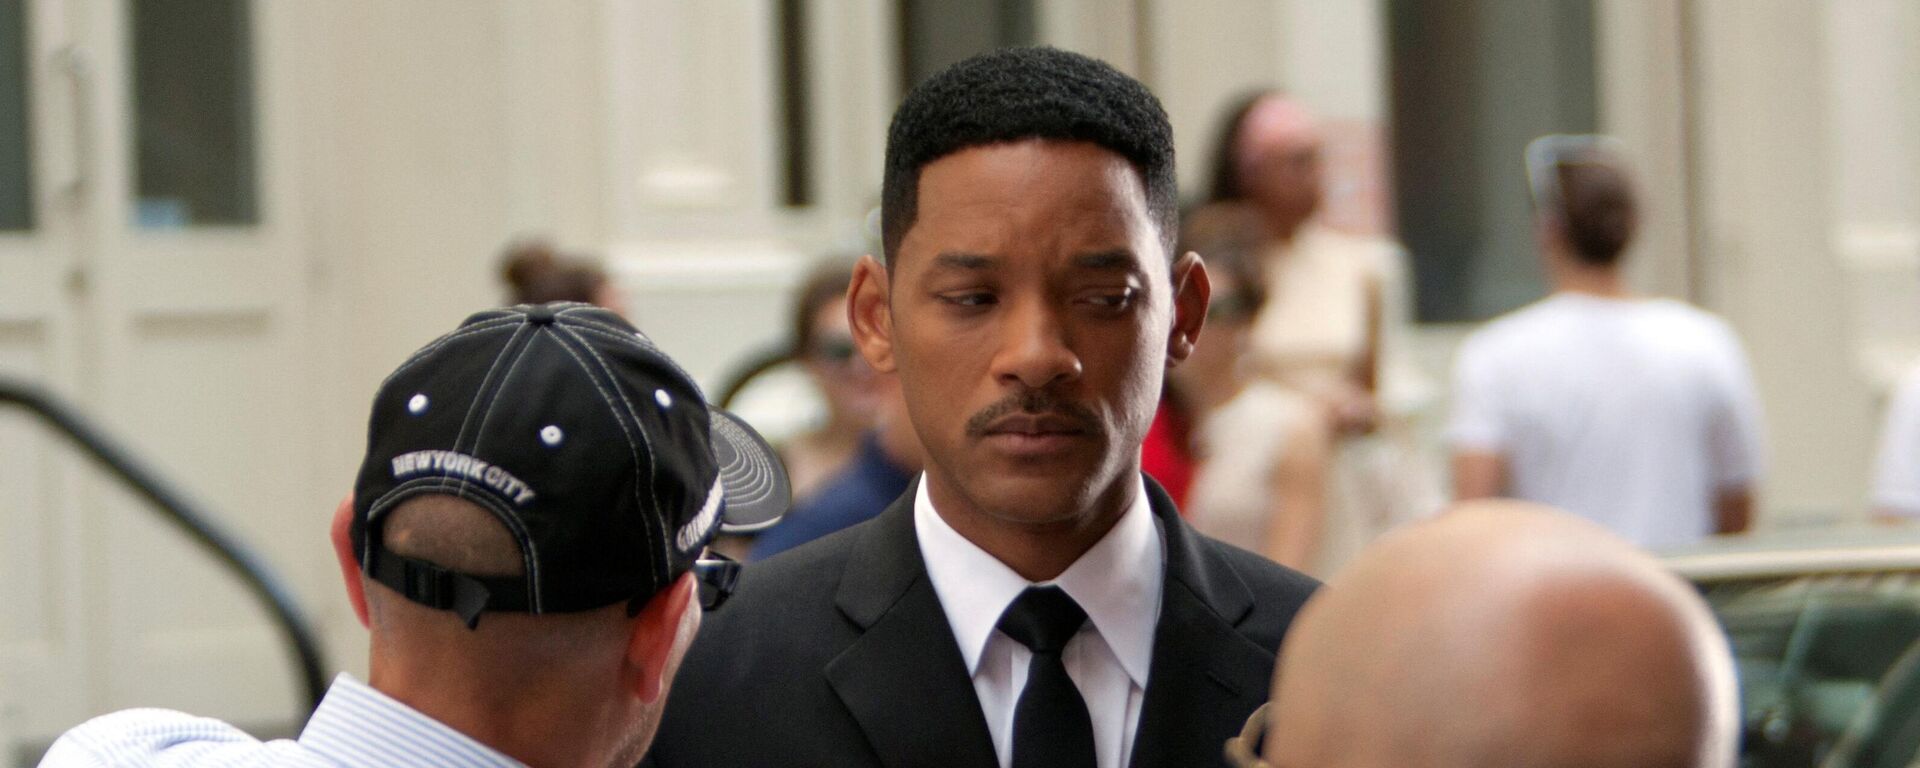 Actor Will Smith has his tie adjusted between takes on the set of Men In Black 3 in New York City June 6, 2011 - Sputnik International, 1920, 29.03.2022